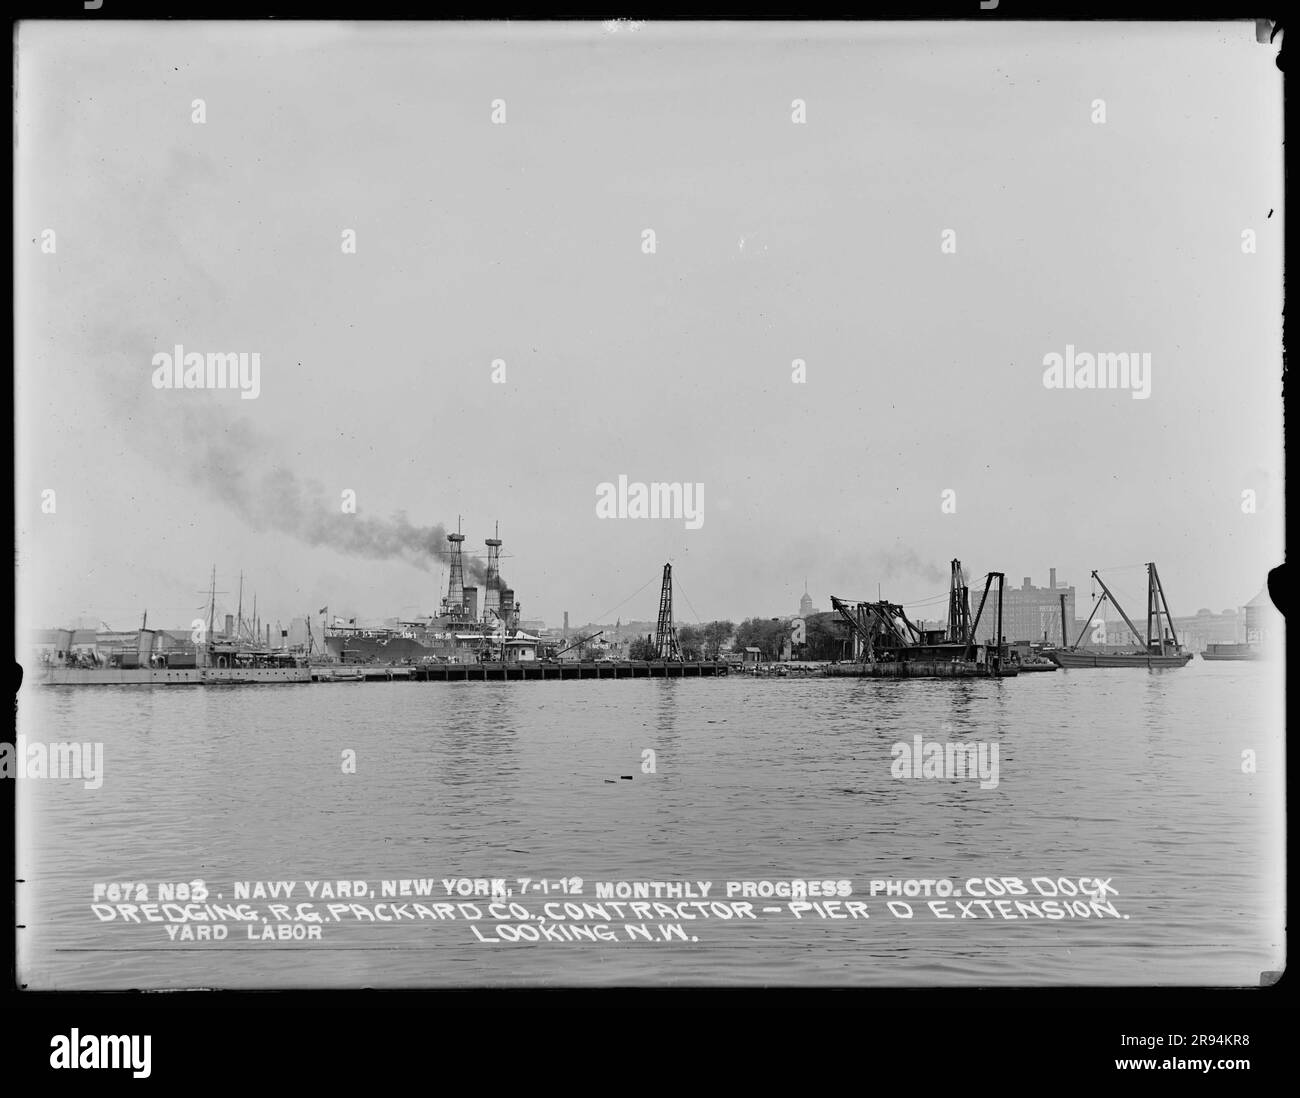 Monthly Progress Photo, Cob Dock Dredging, Pier D Extension Looking Northwest, Yard Labor, R. G. Packard Company, Contractor. Glass Plate Negatives of the Construction and Repair of Buildings, Facilities, and Vessels at the New York Navy Yard. Stock Photo